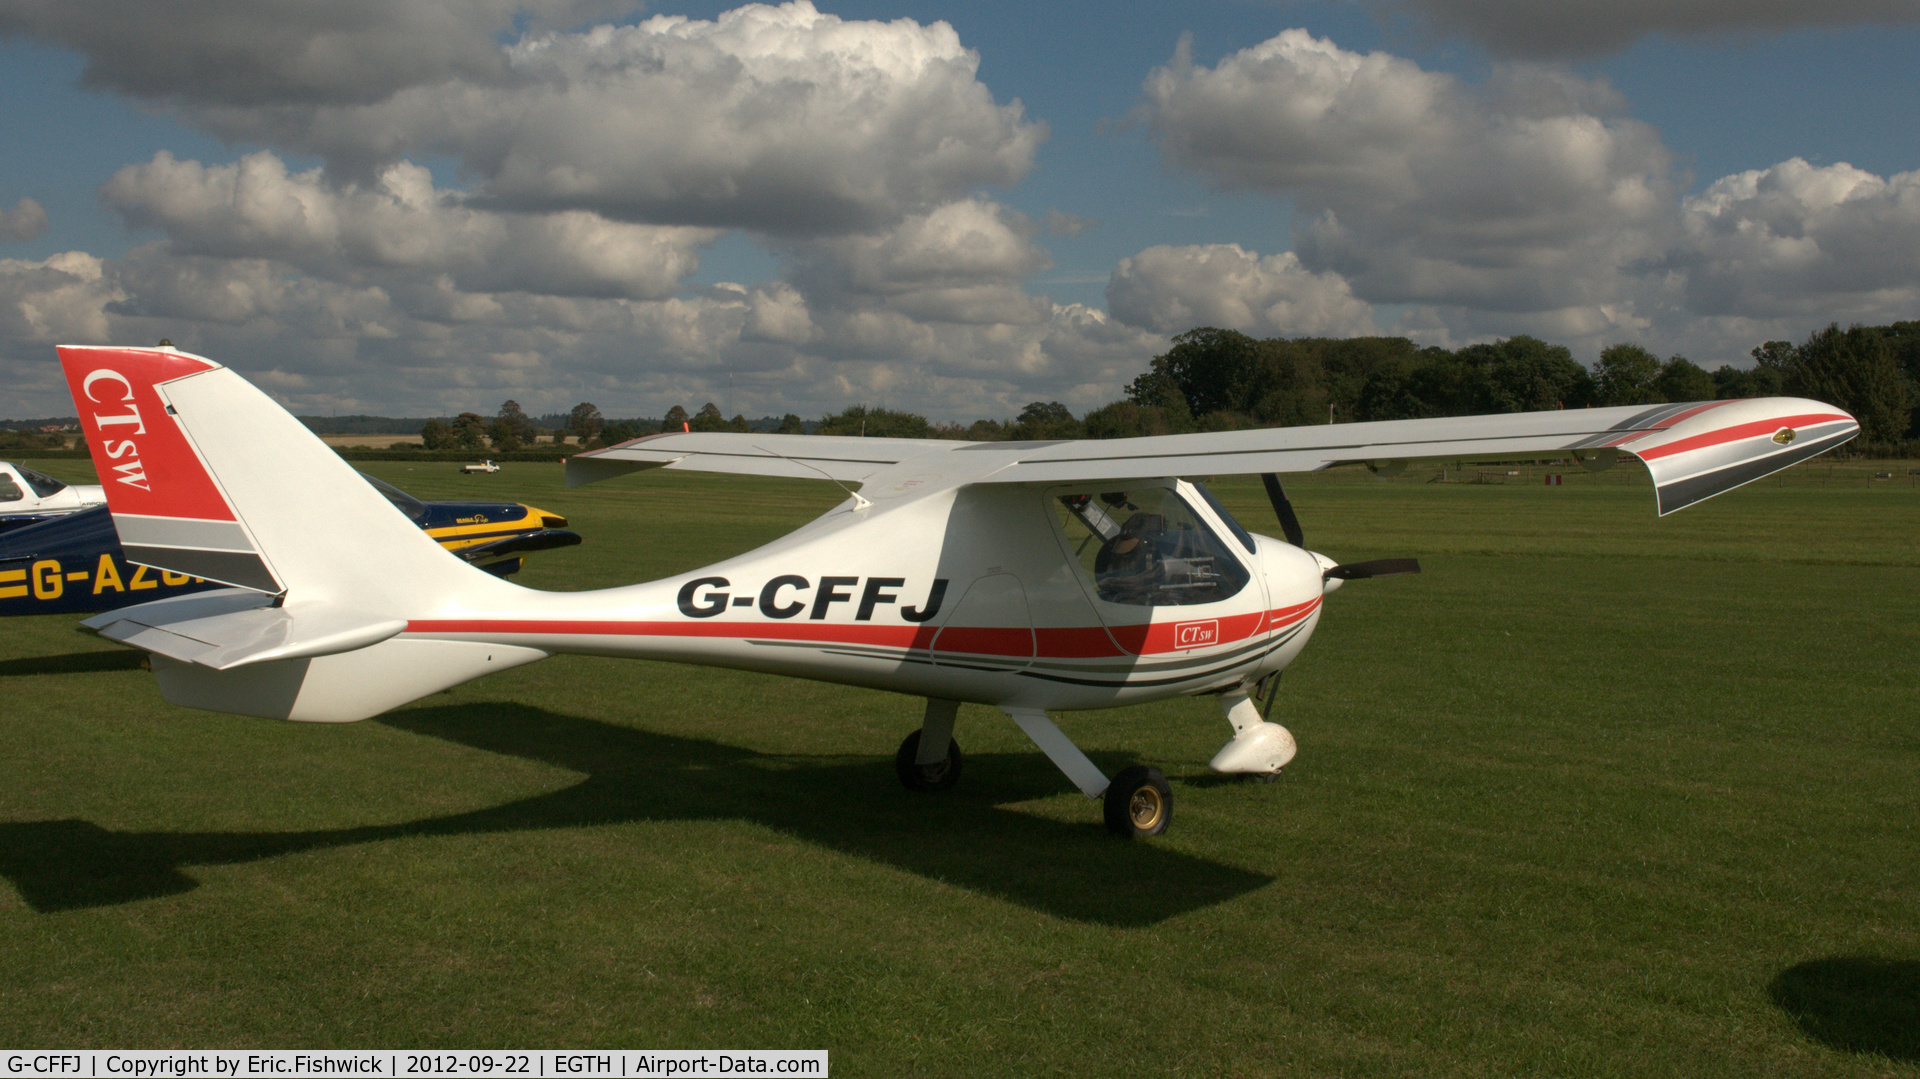 G-CFFJ, 2008 Flight Design CTSW C/N 8391, 2. G- CFFJ at Shuttleworth Uncovered - Air Show, Sept. 2012.